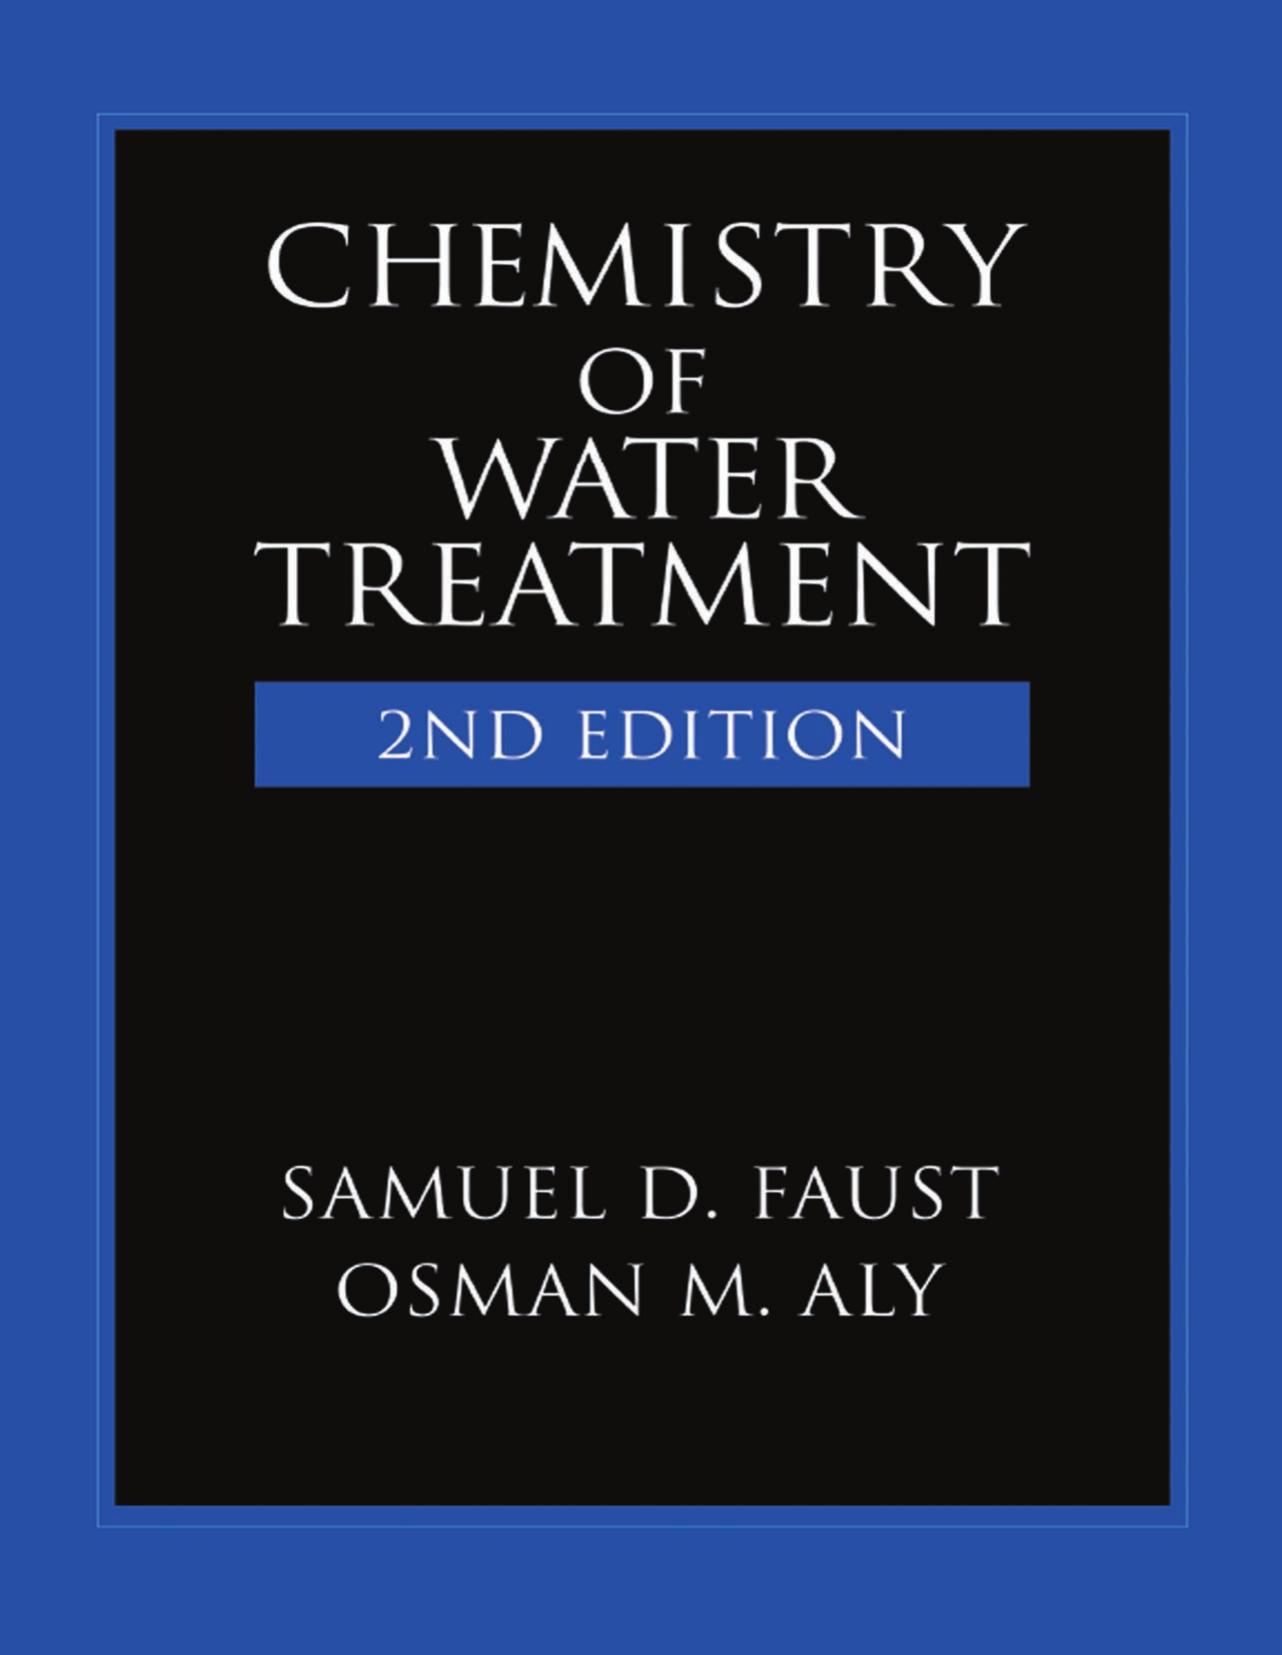 CHEMISTRY OF WATER TREATMENT